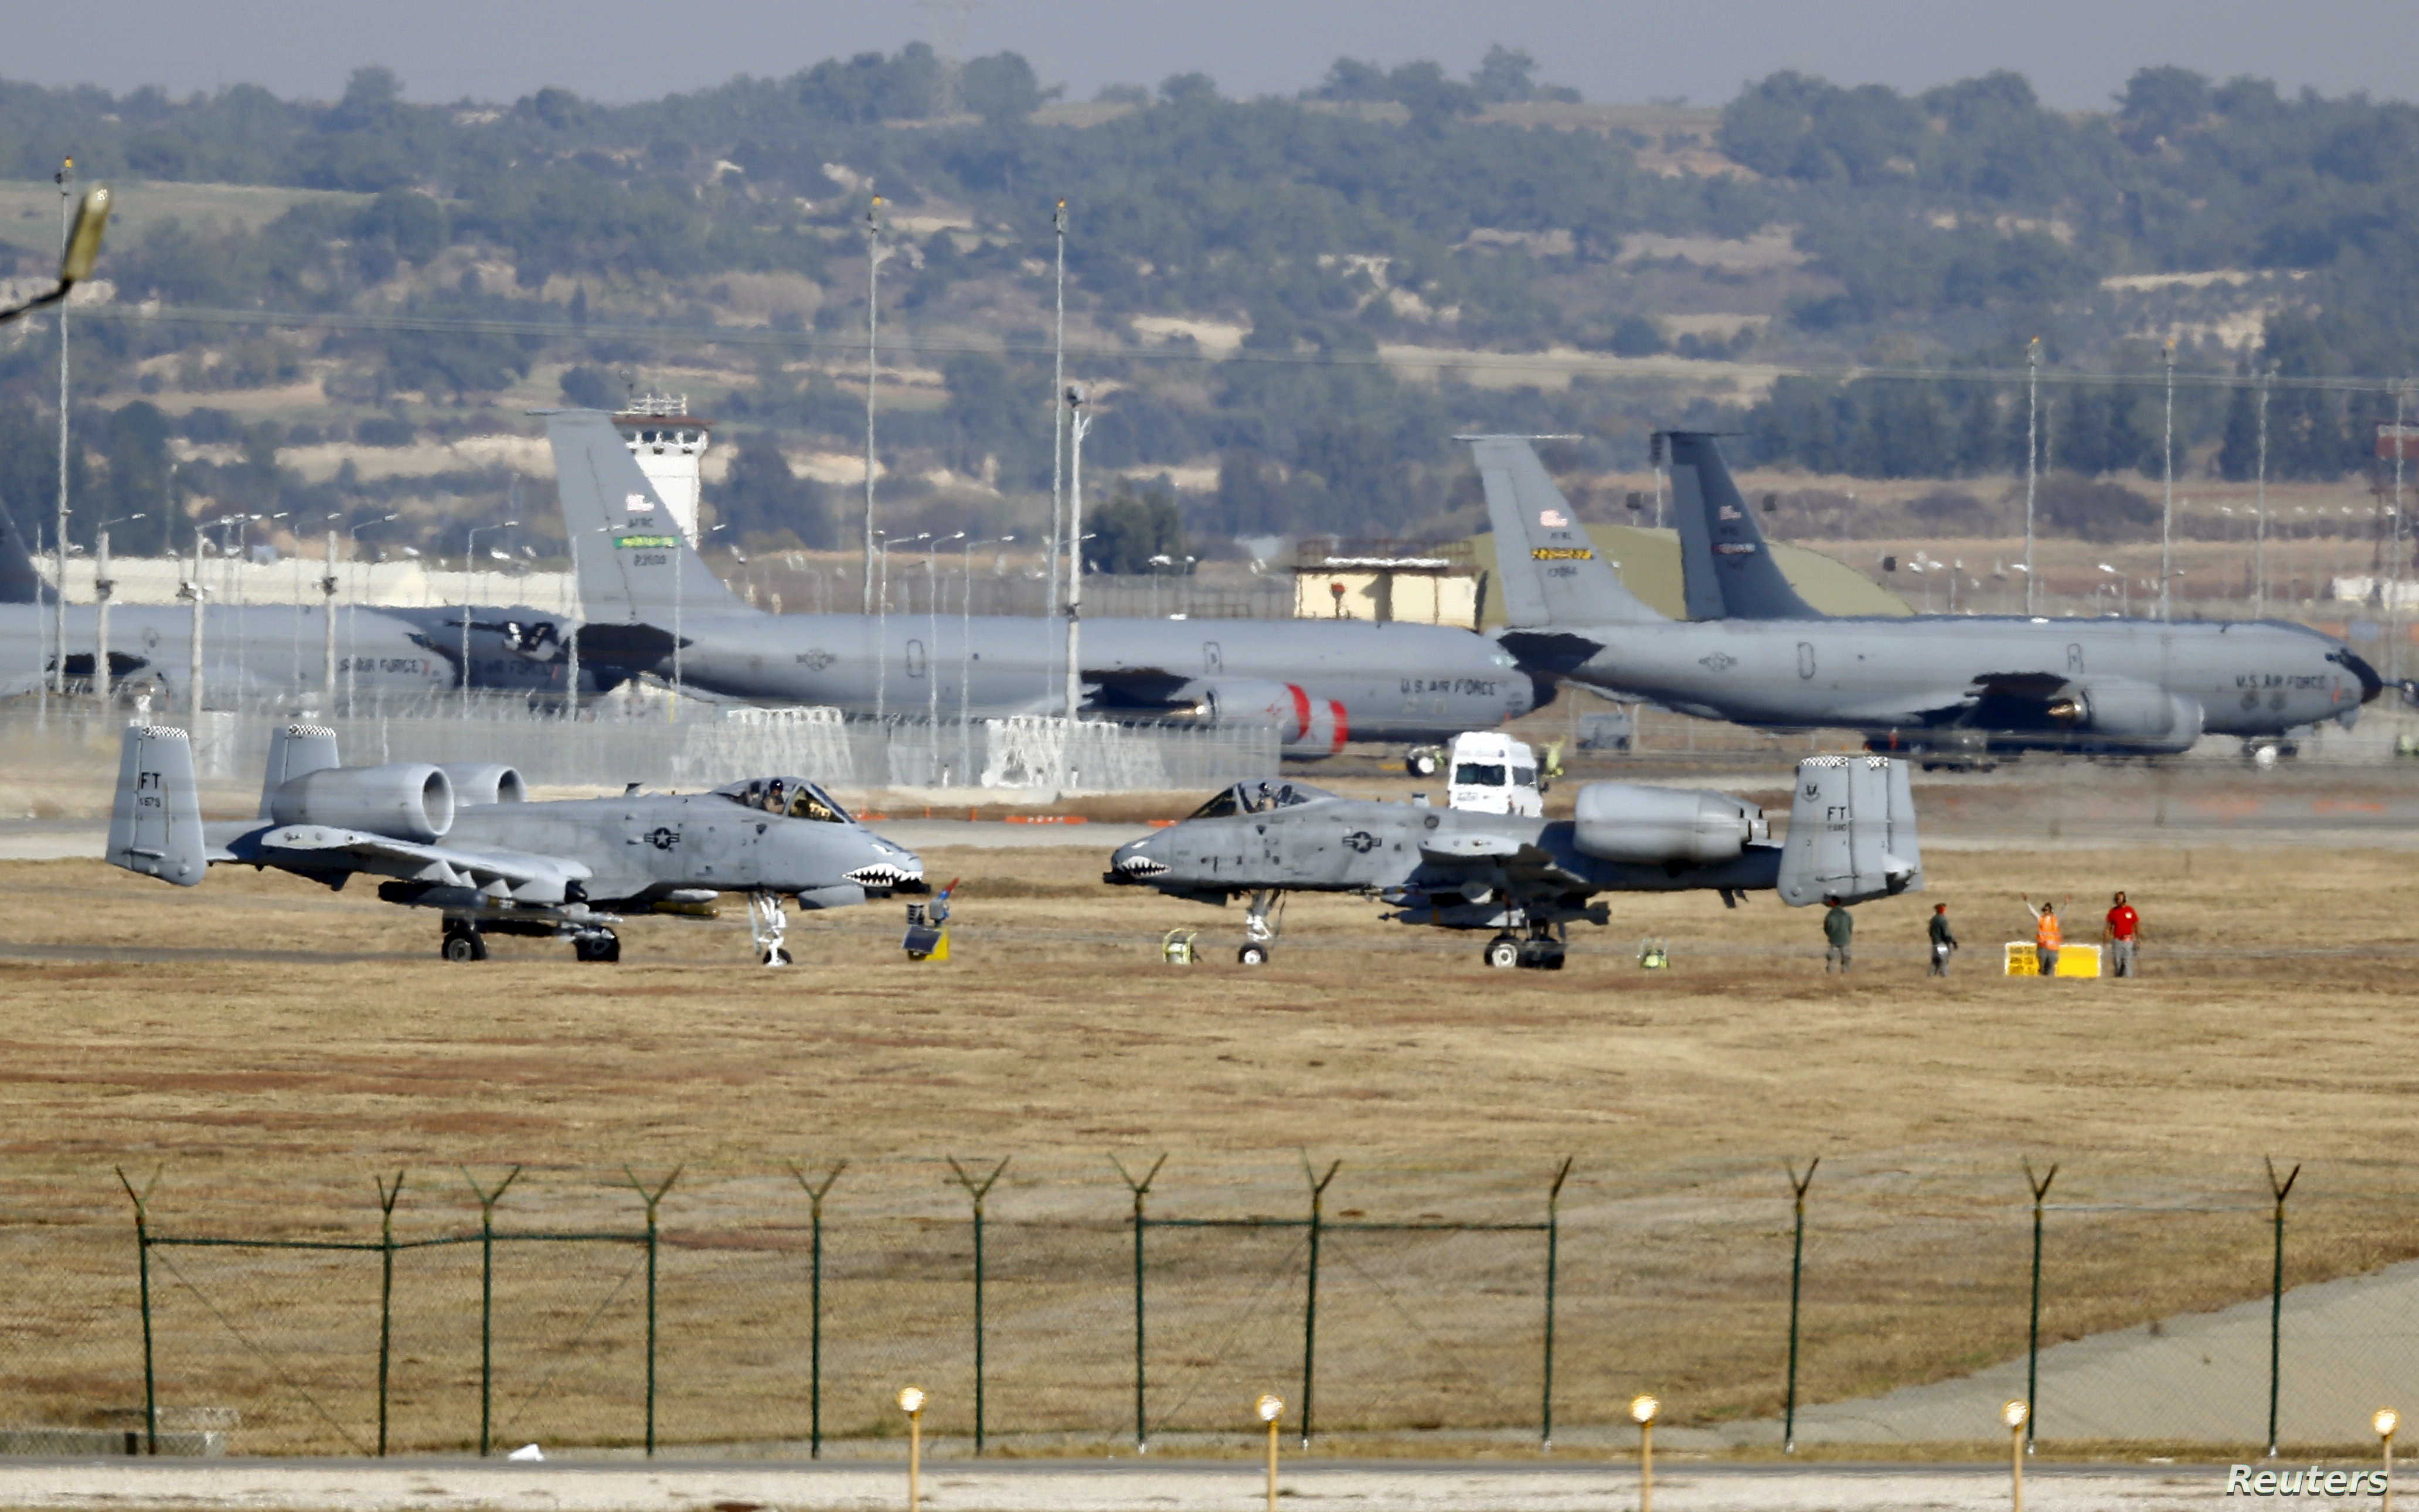 U.S. Air Force A-10 Thunderbolt II fighter jets (foreground) are pictured at Incirlik airbase in the southern city of Adana, Turkey, in this December 11, 2015 file photo. REUTERS/Umit Bektas/Files - GF10000364314